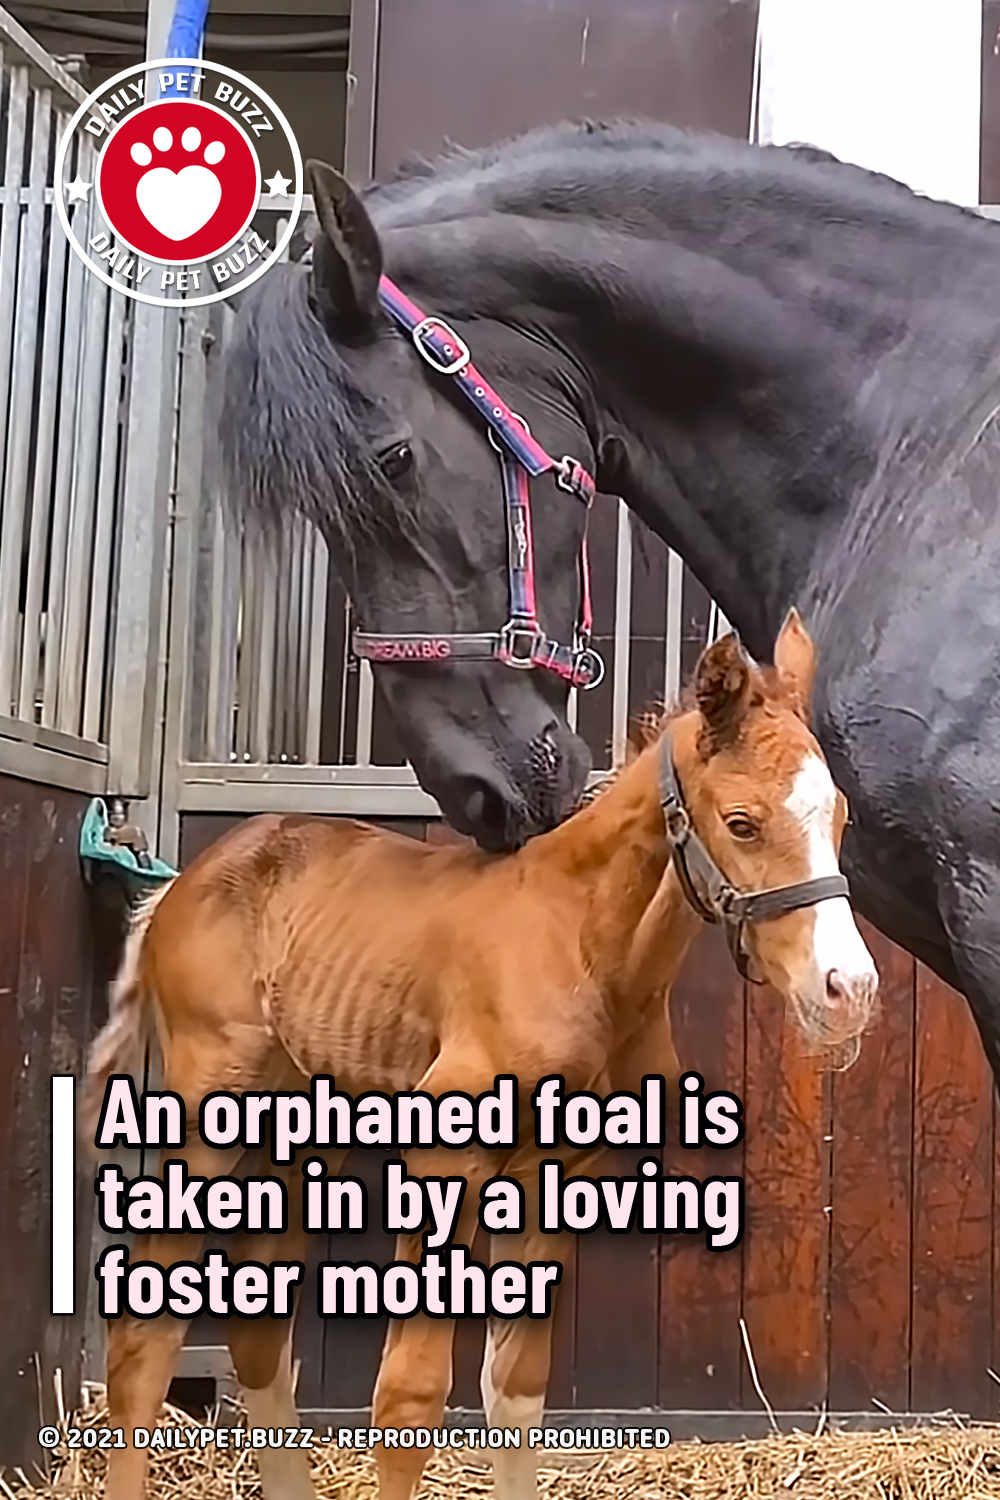 An orphaned foal is taken in by a loving foster mother